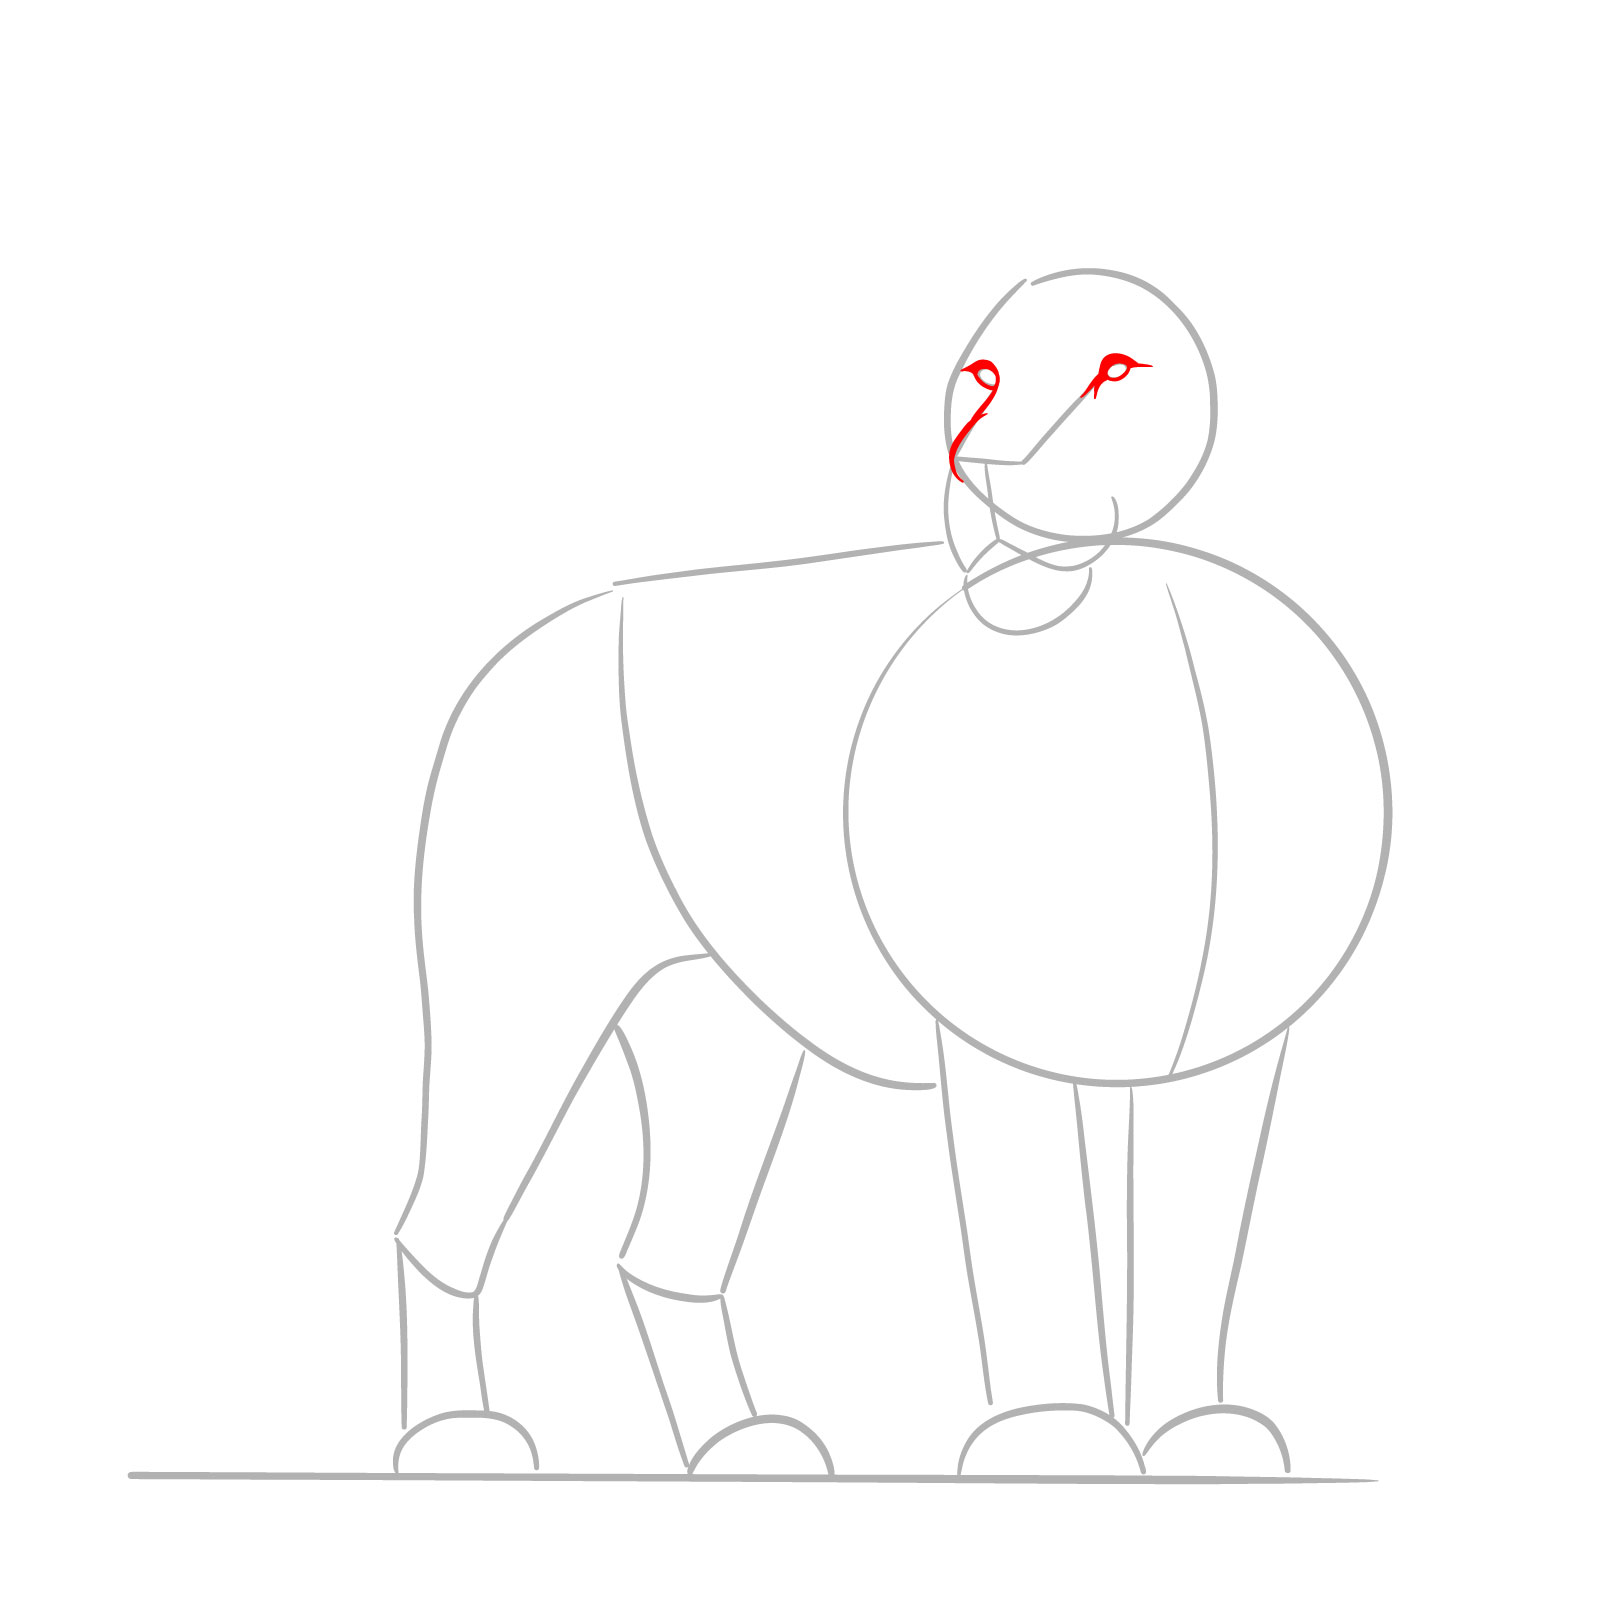 Outline of eyes and upper nose for creating a realistic standing lion drawing - step 03